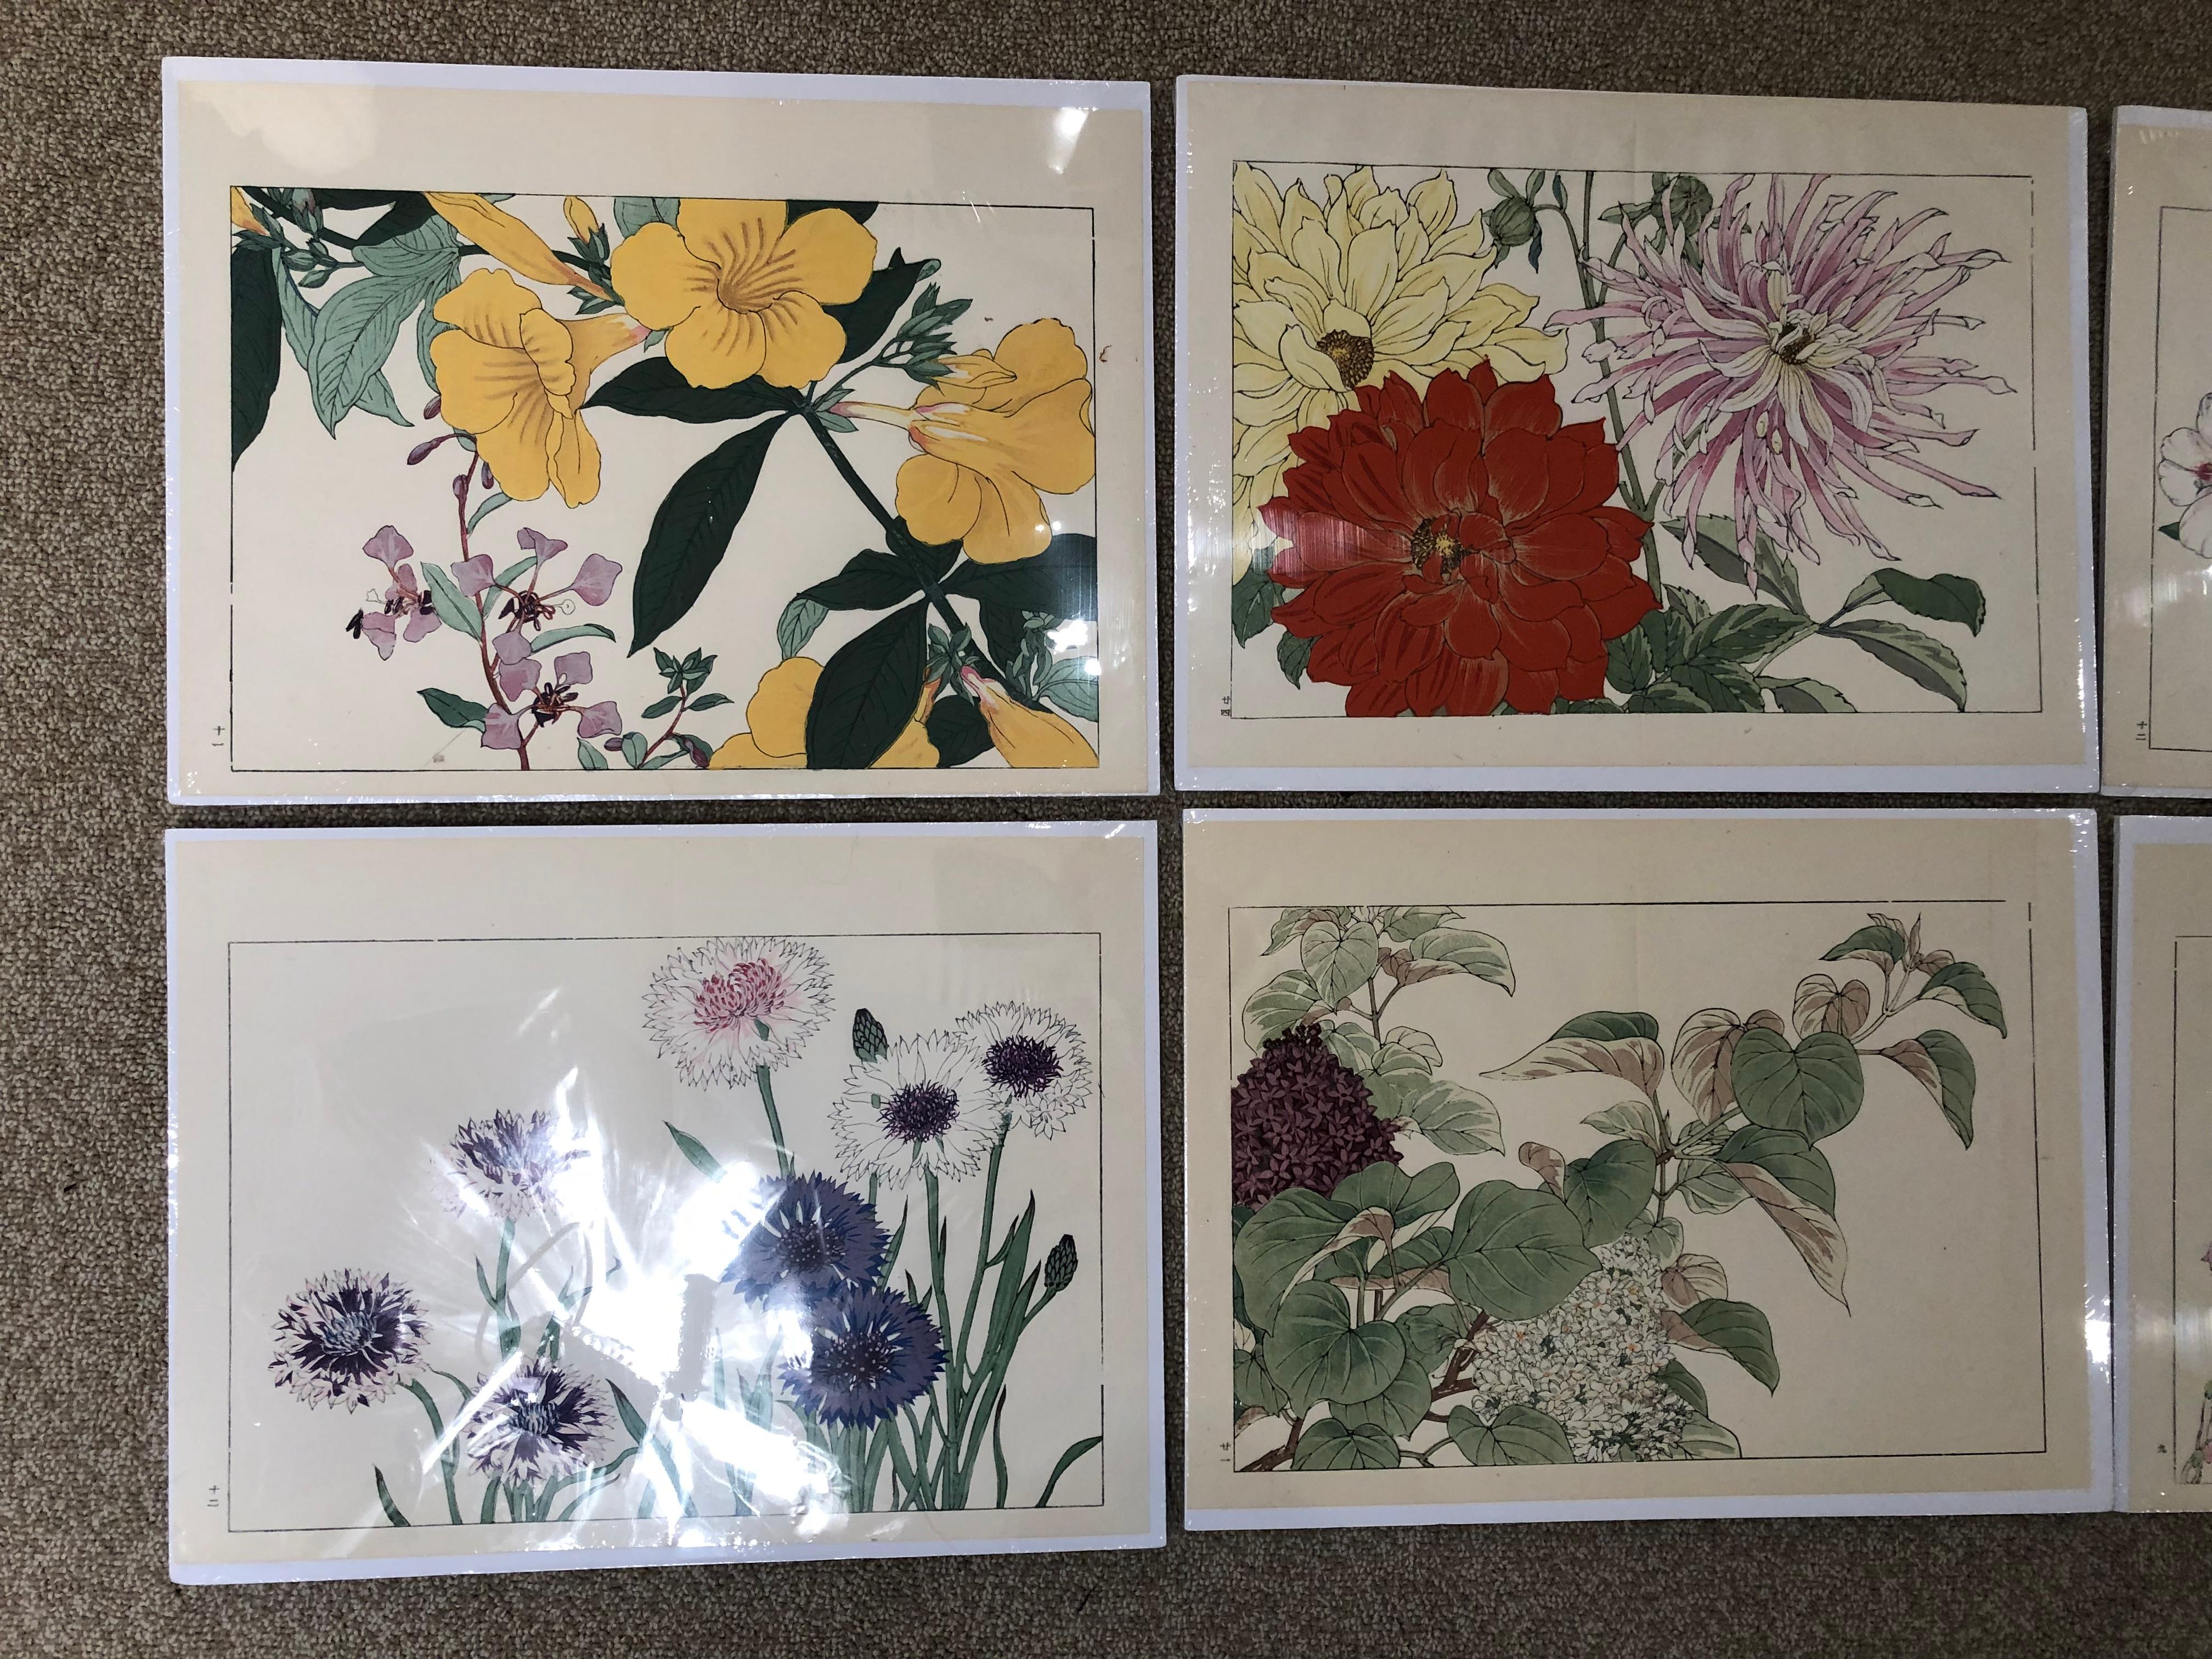 Japan woodblock flower prints, Tanigami Konan (1879-1928) set of eight (8) from original book.

These exuberant 20th century botanical works were originally created to appeal to westerners and to celebrate the beauty and splendor of all seasons